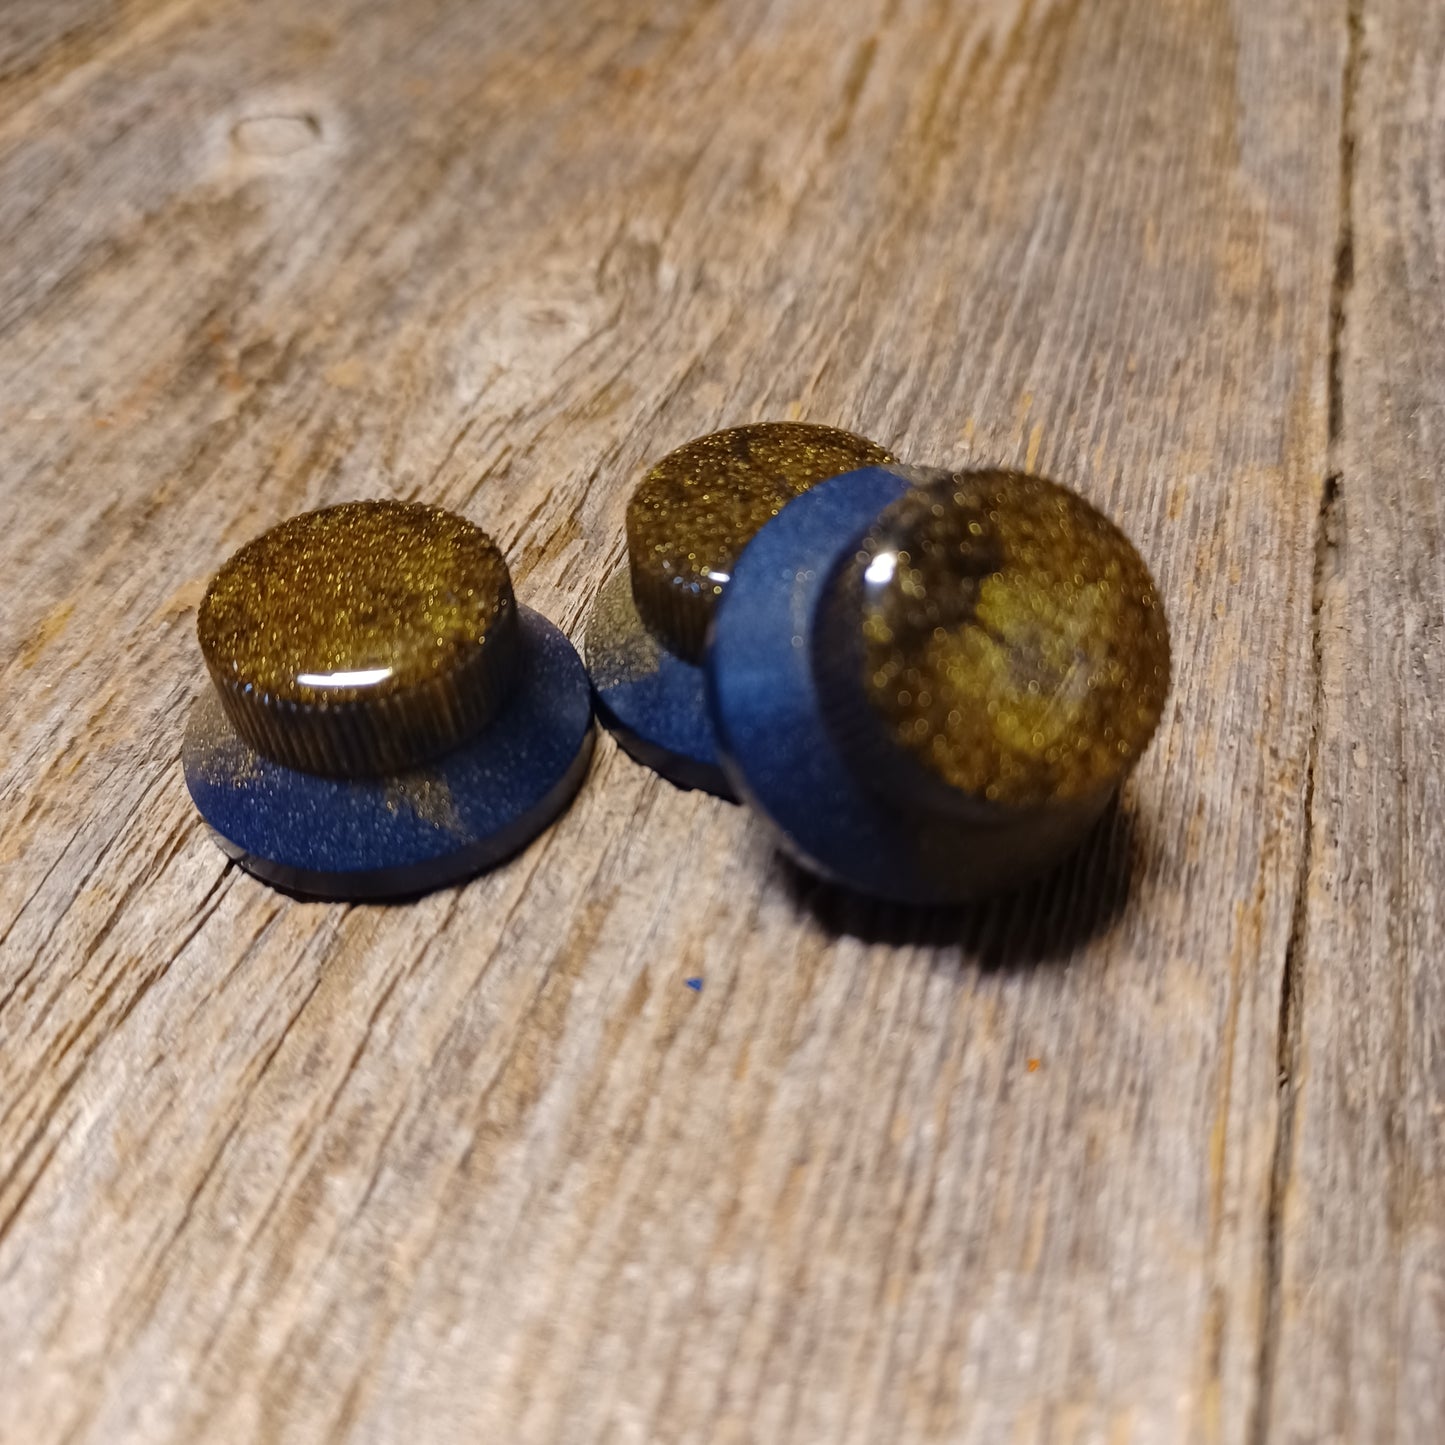 Knobhead PDX Strat Style Bell Knobs Blue with Gold Dust Set of (3)